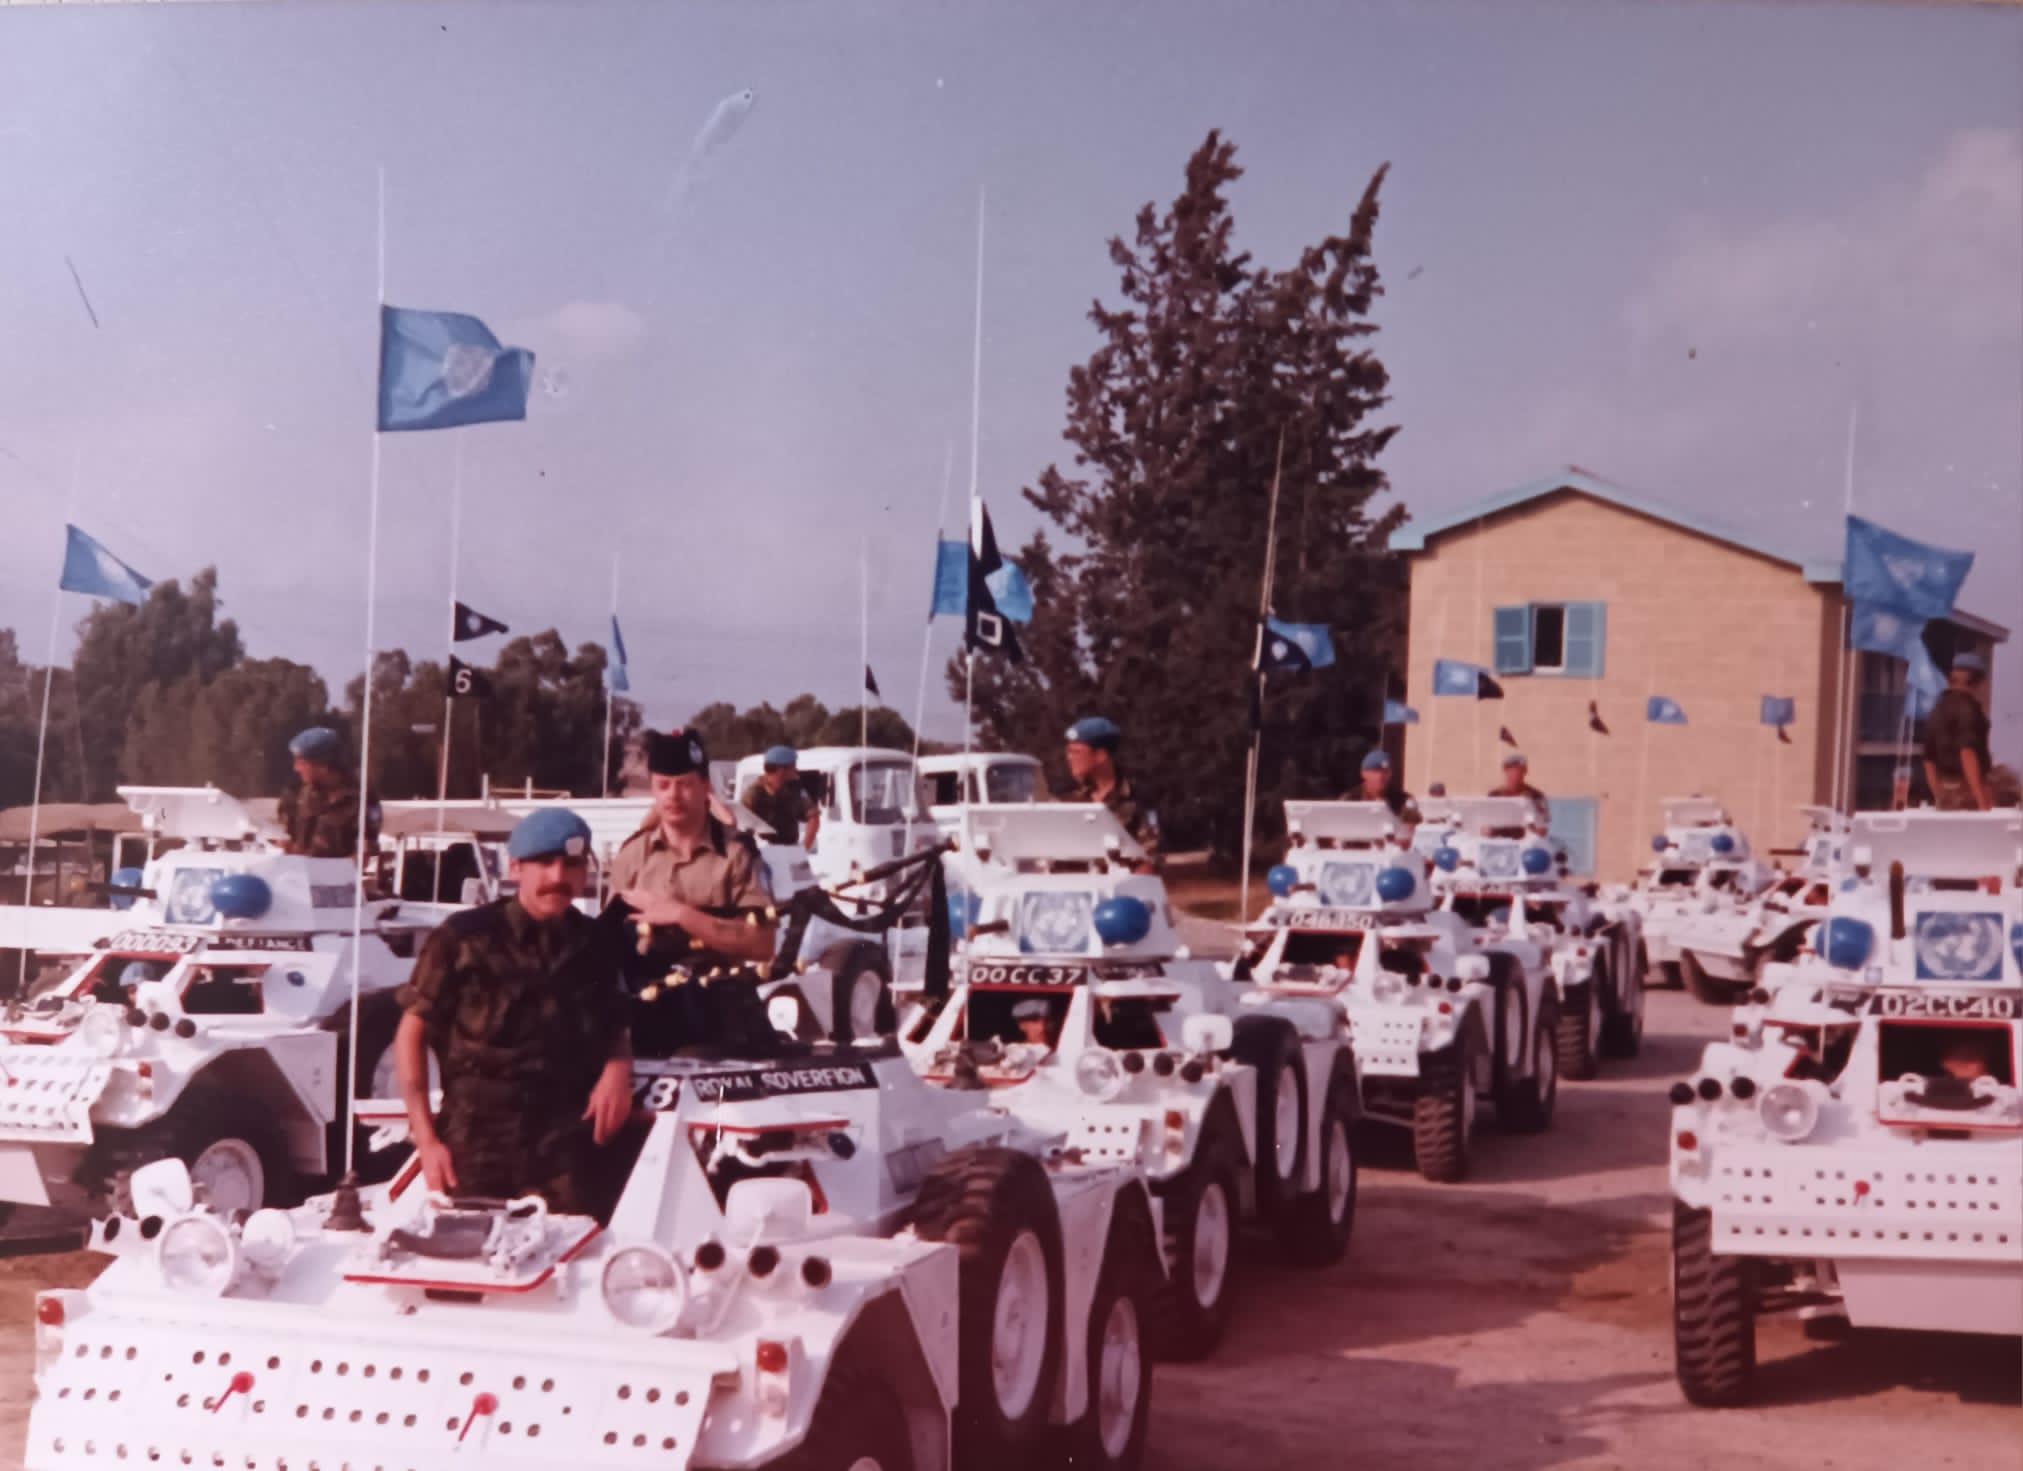 'The United Nations in Cyprus, on our way to collect medals.' 